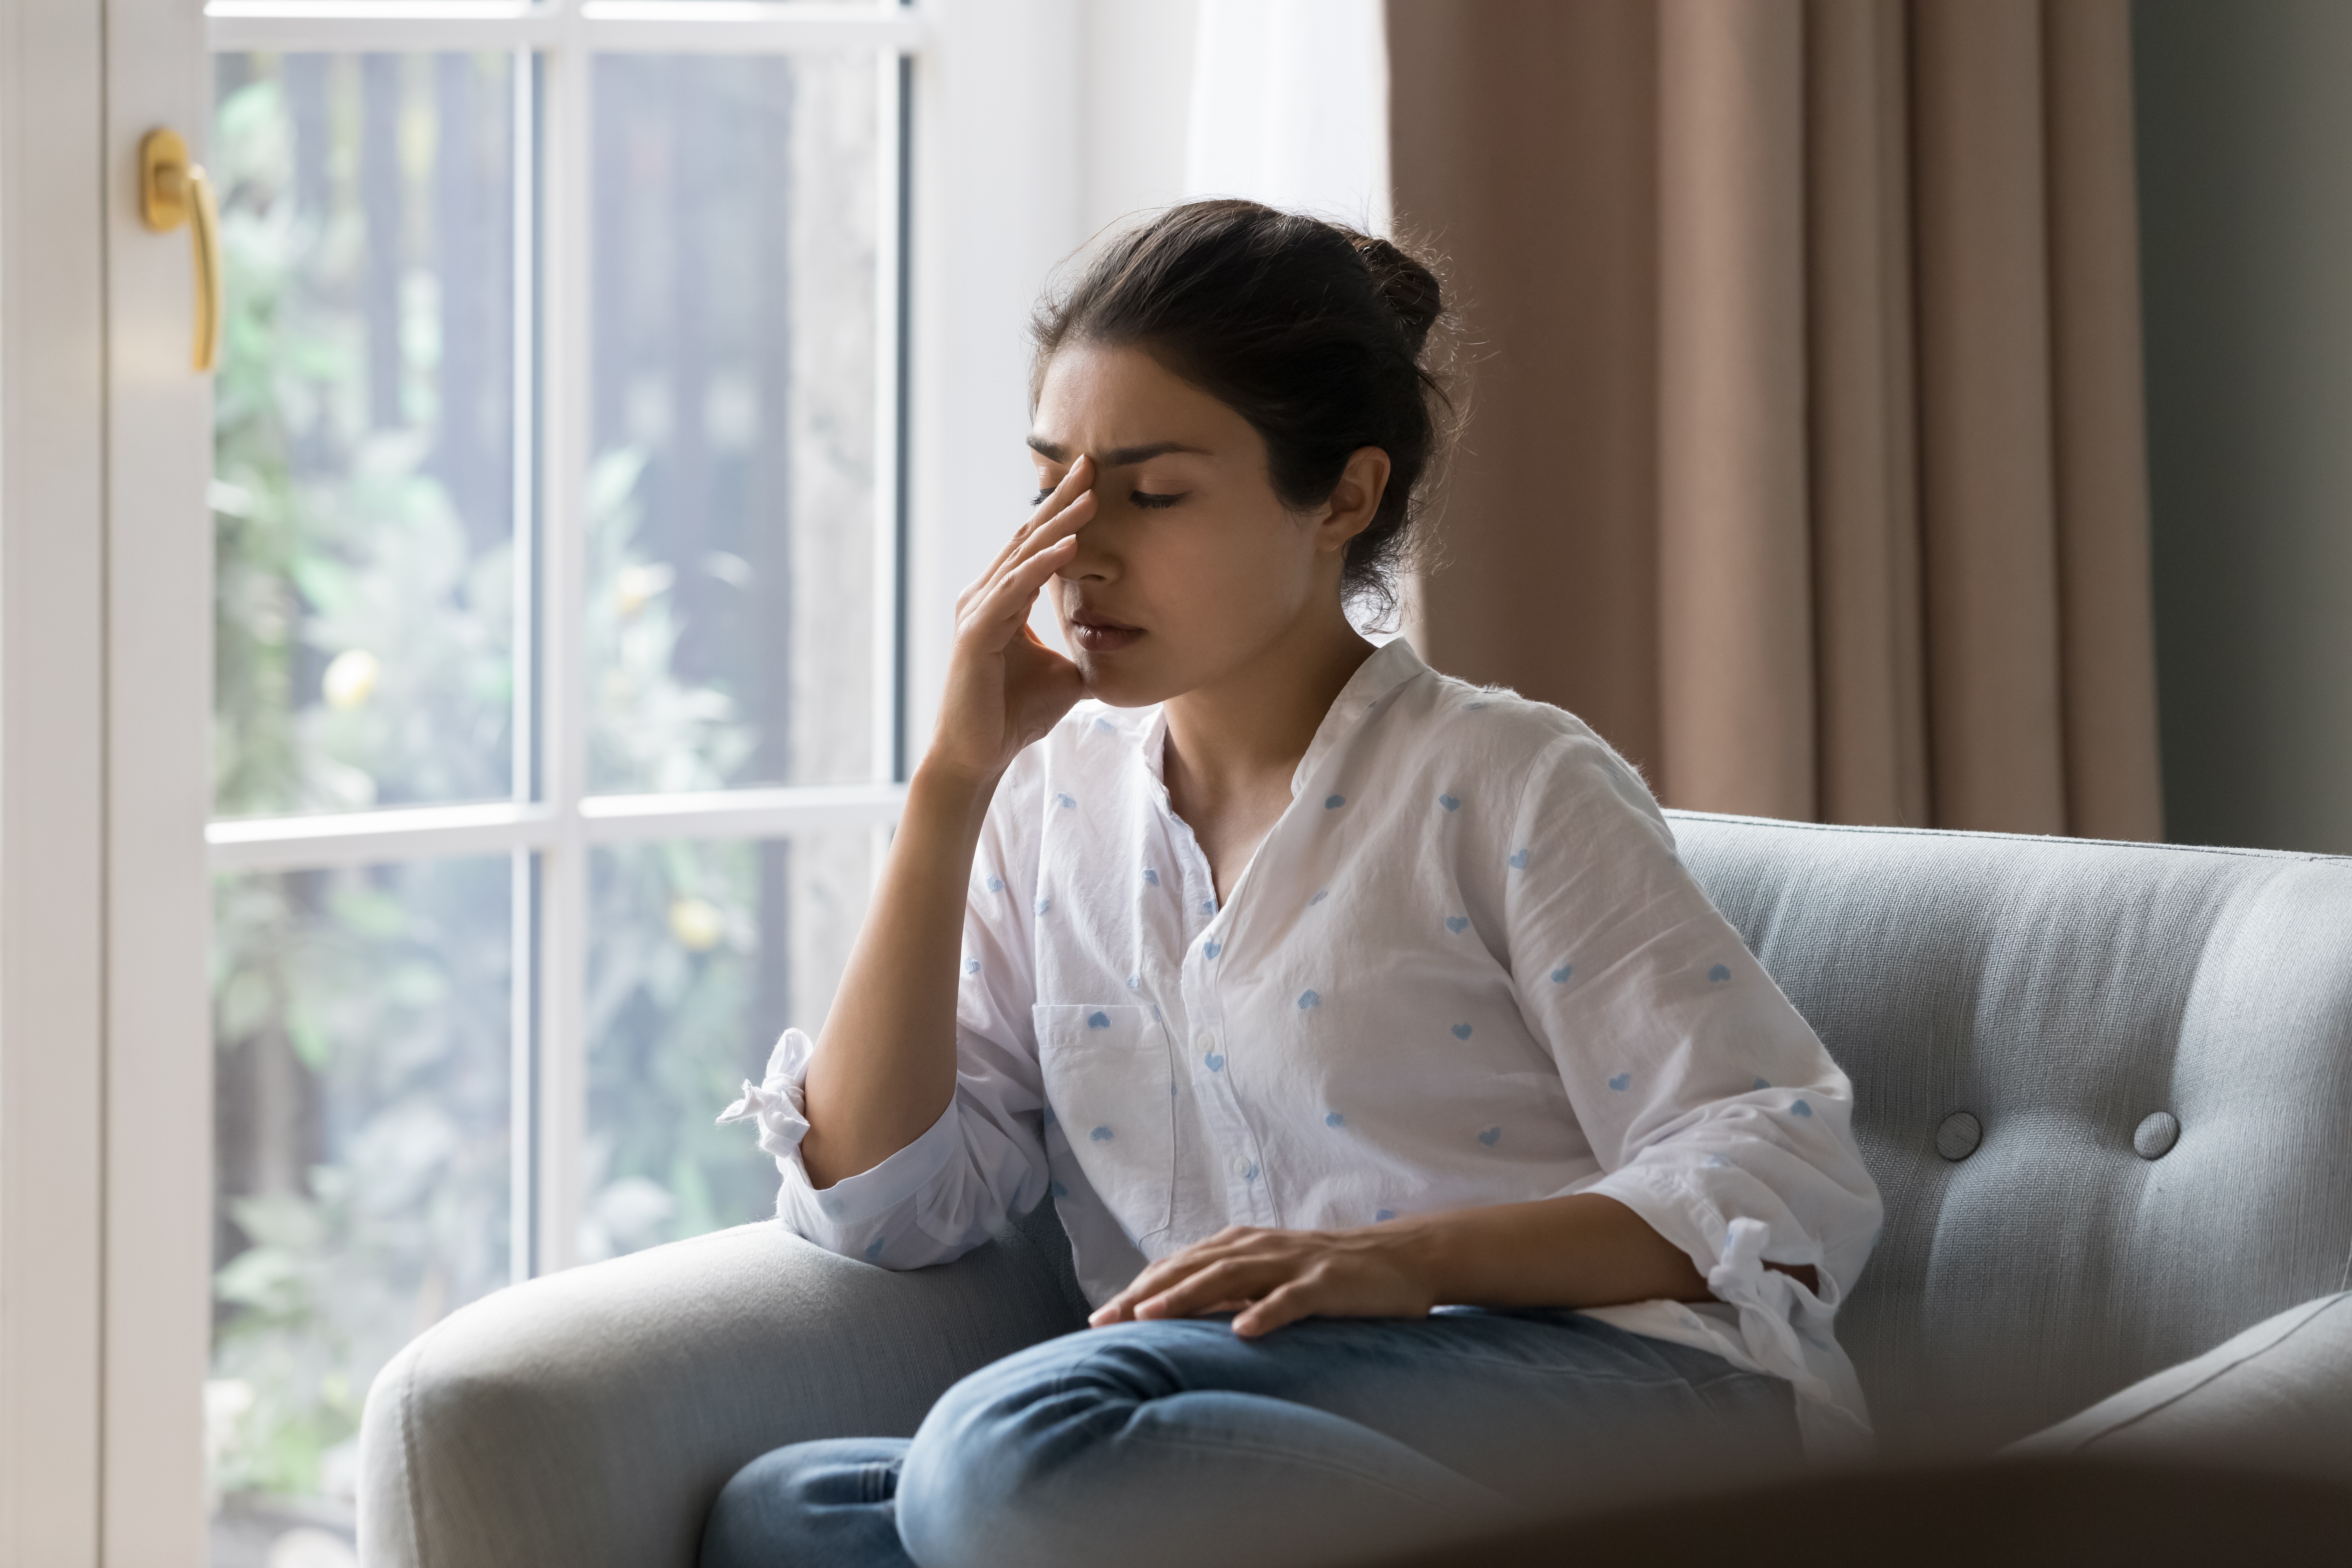 Depressed frustrated woman | Source: Shutterstock